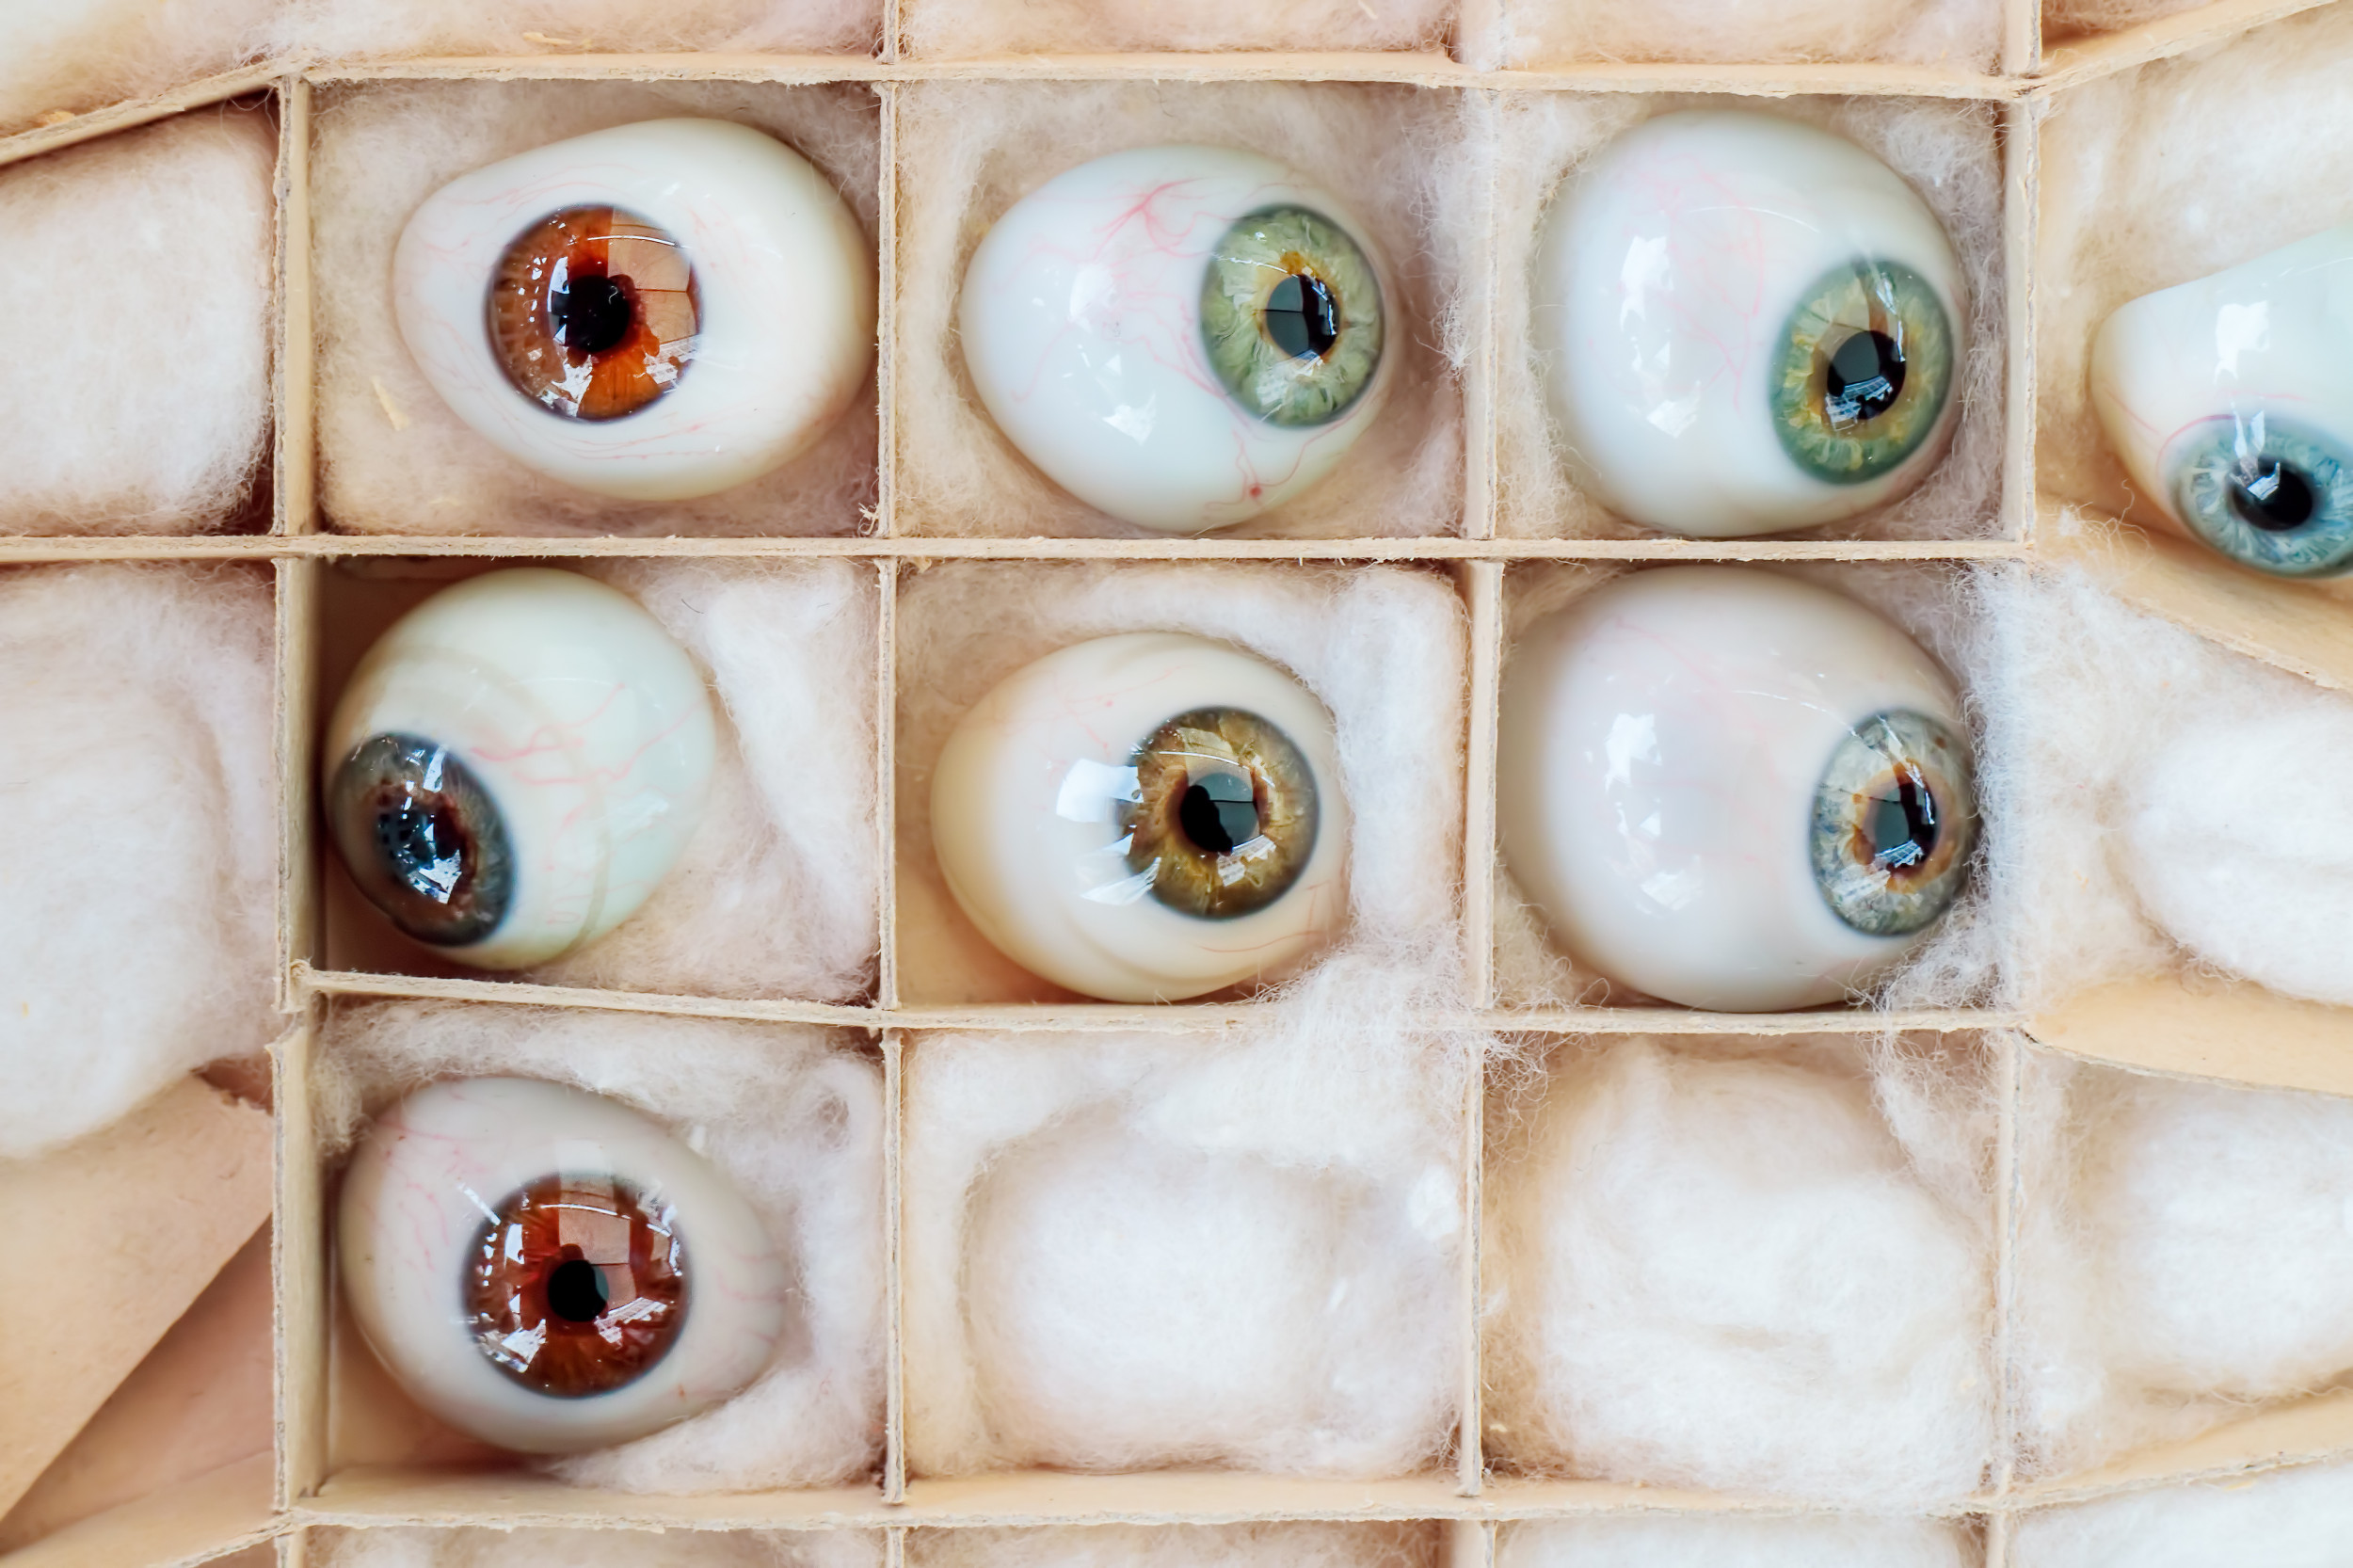 Man Creates Incredible Prosthetic Eyes After Losing His Own to Cancer